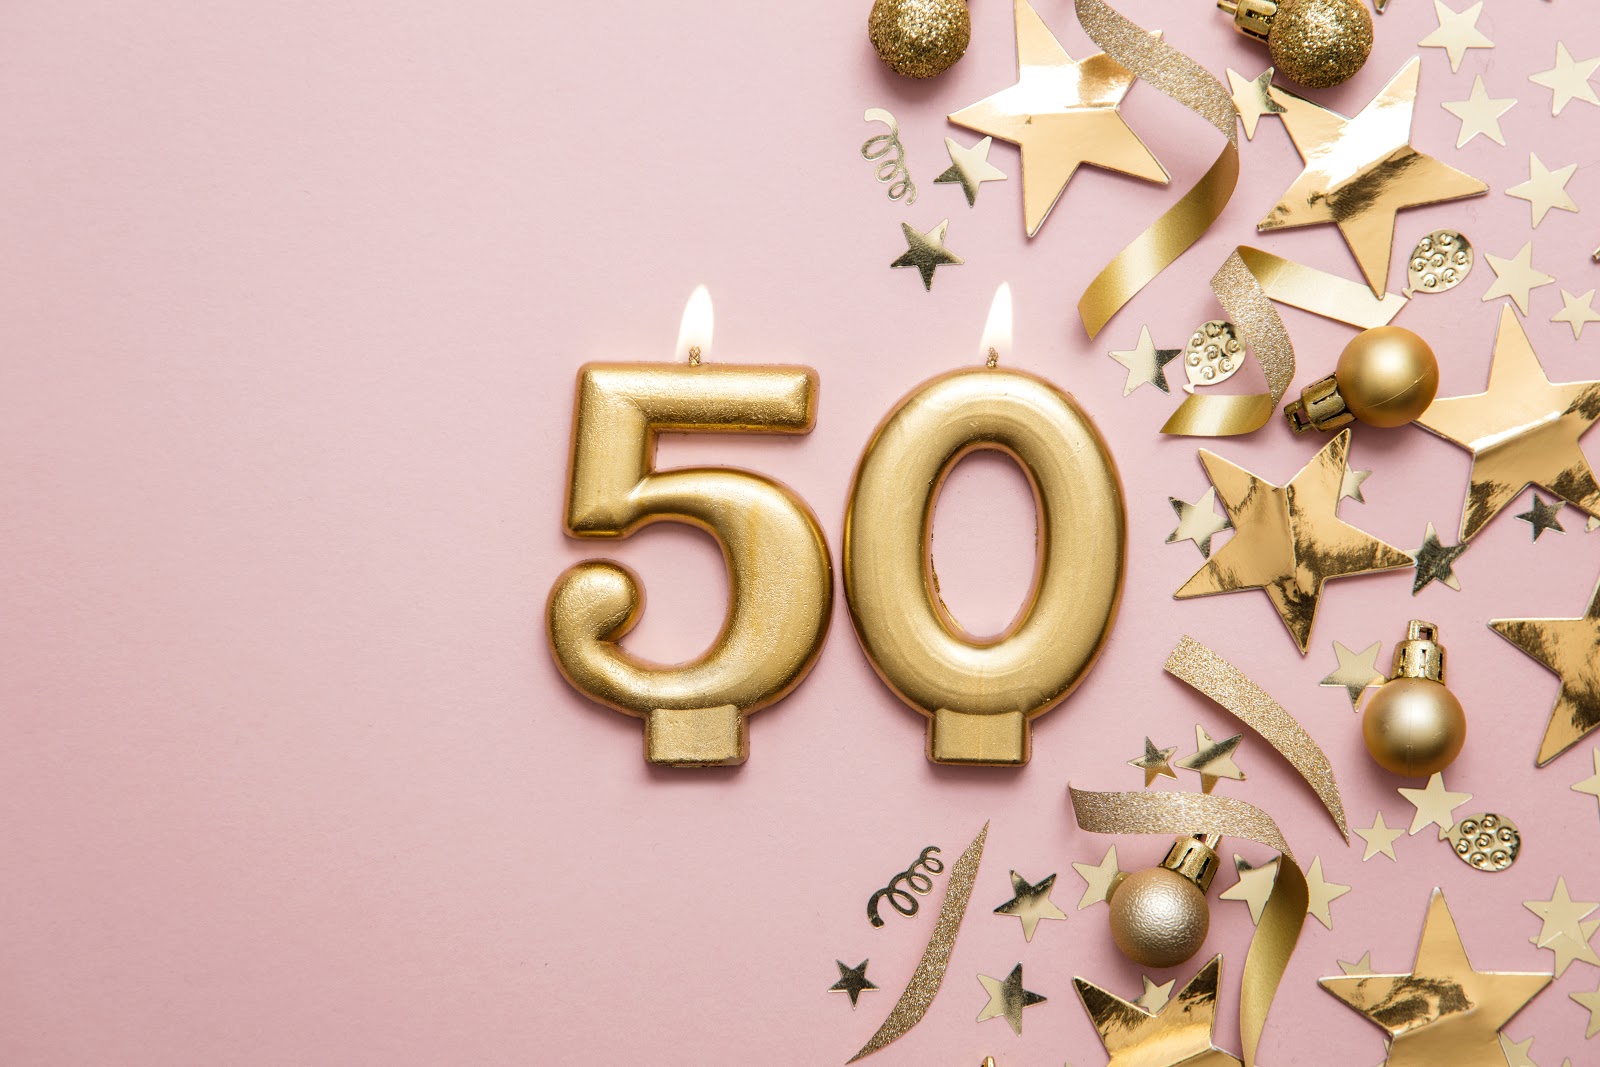 How Do You Celebrate A Woman's 50th Birthday?